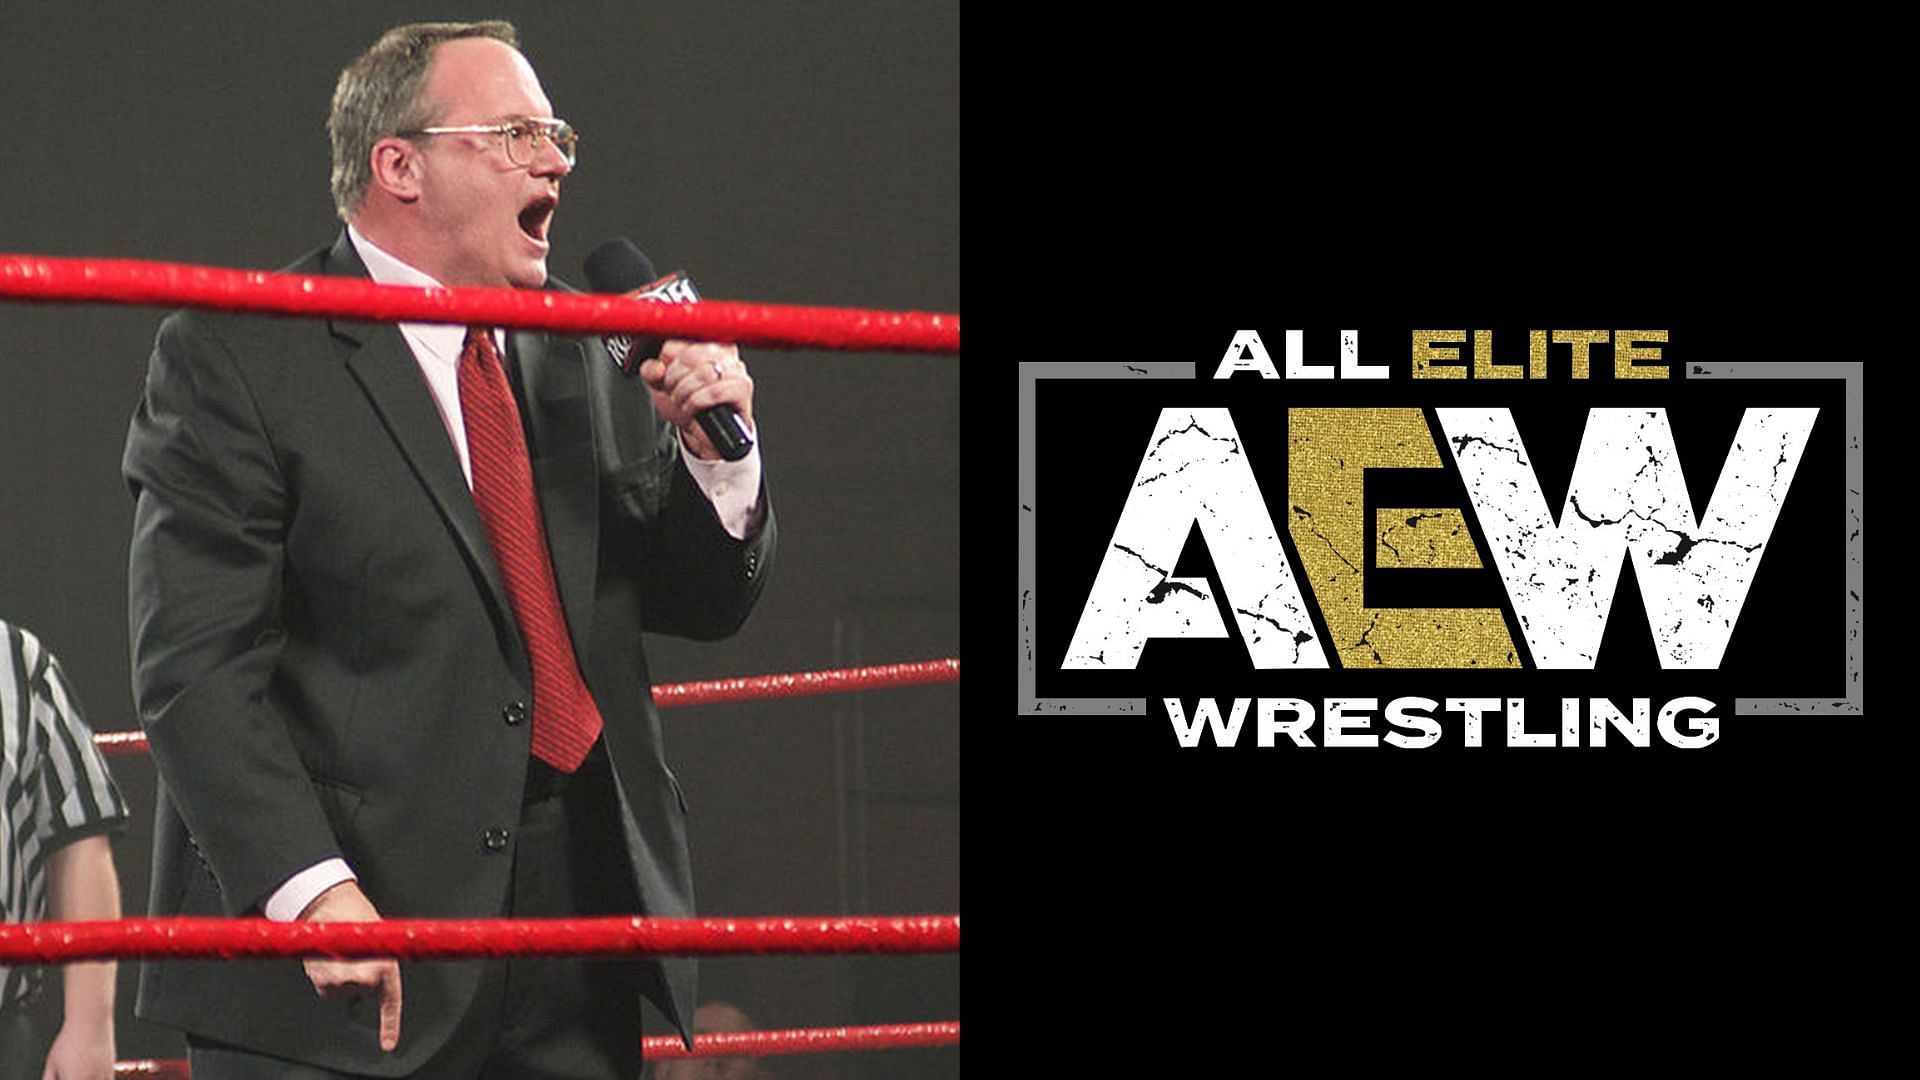 Cornette sees potential in this star but doesn